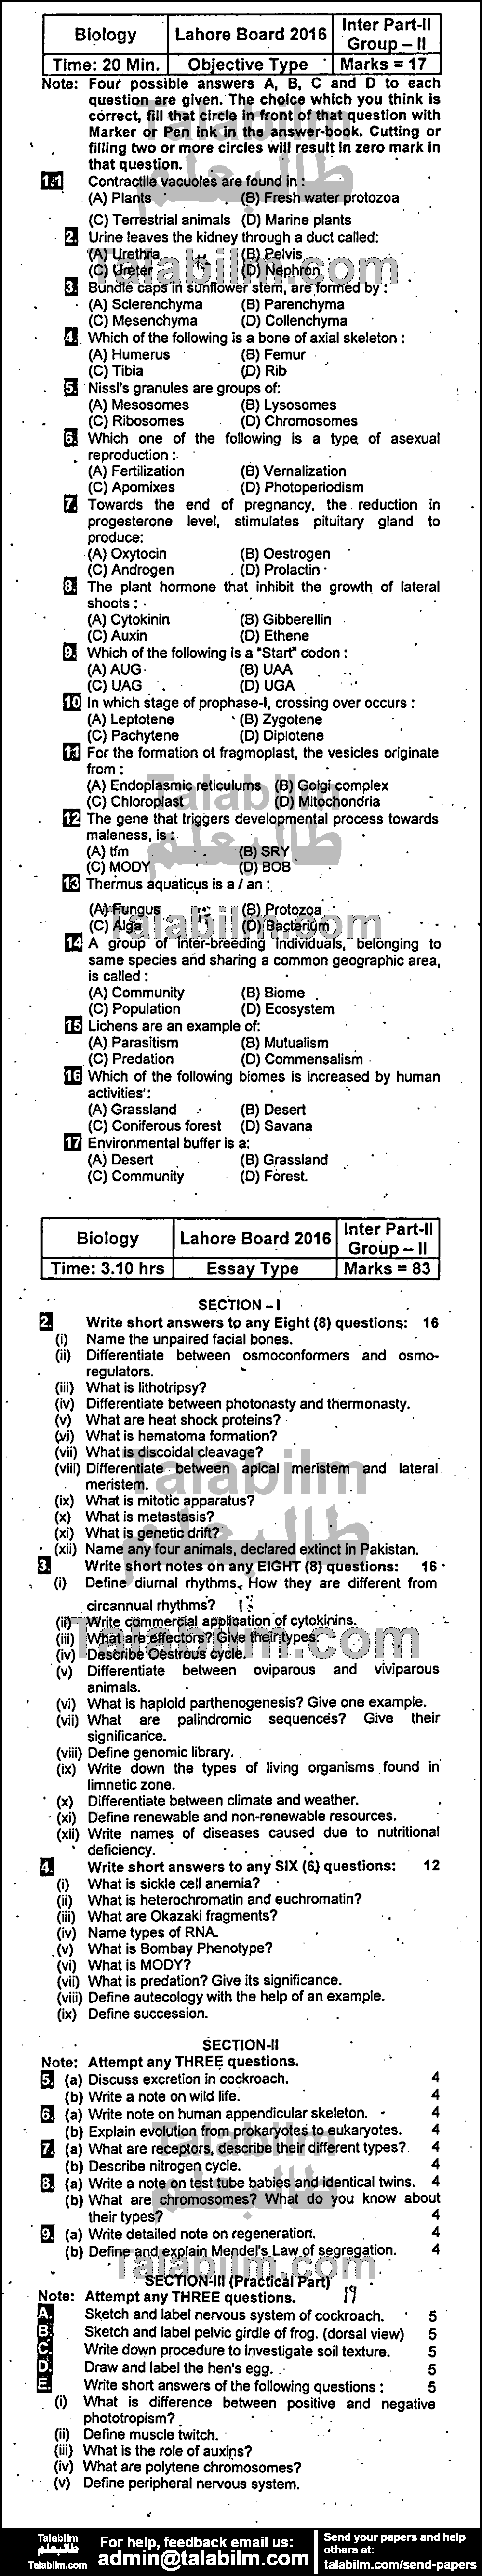 Biology 0 past paper for Group-II 2016